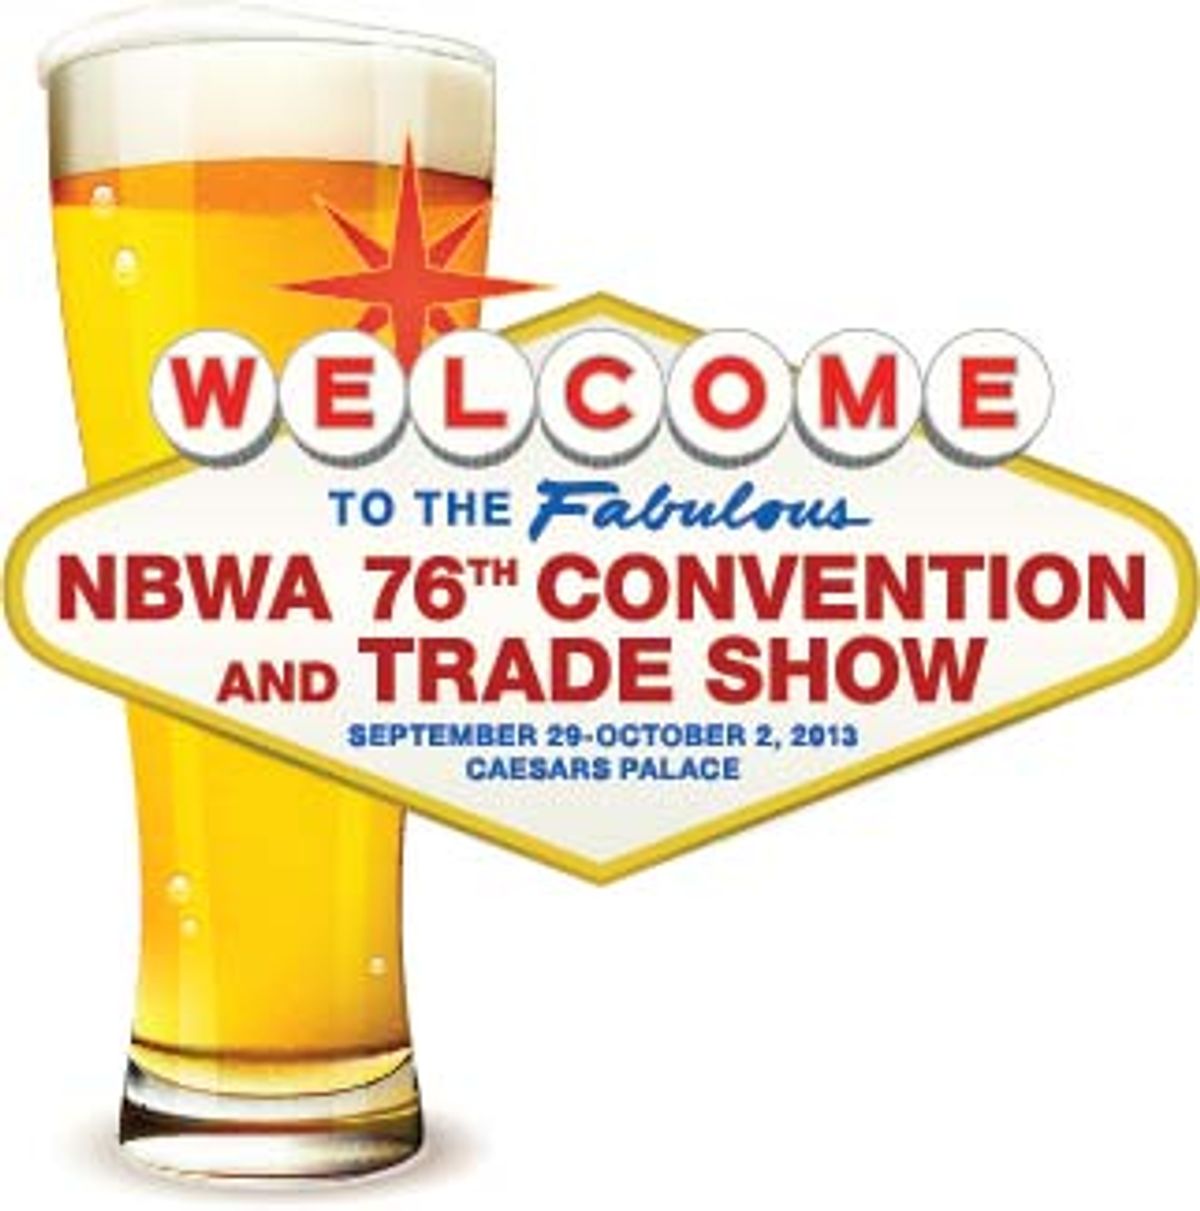 Penske Truck Leasing Exhibiting at NBWA Annual Convention